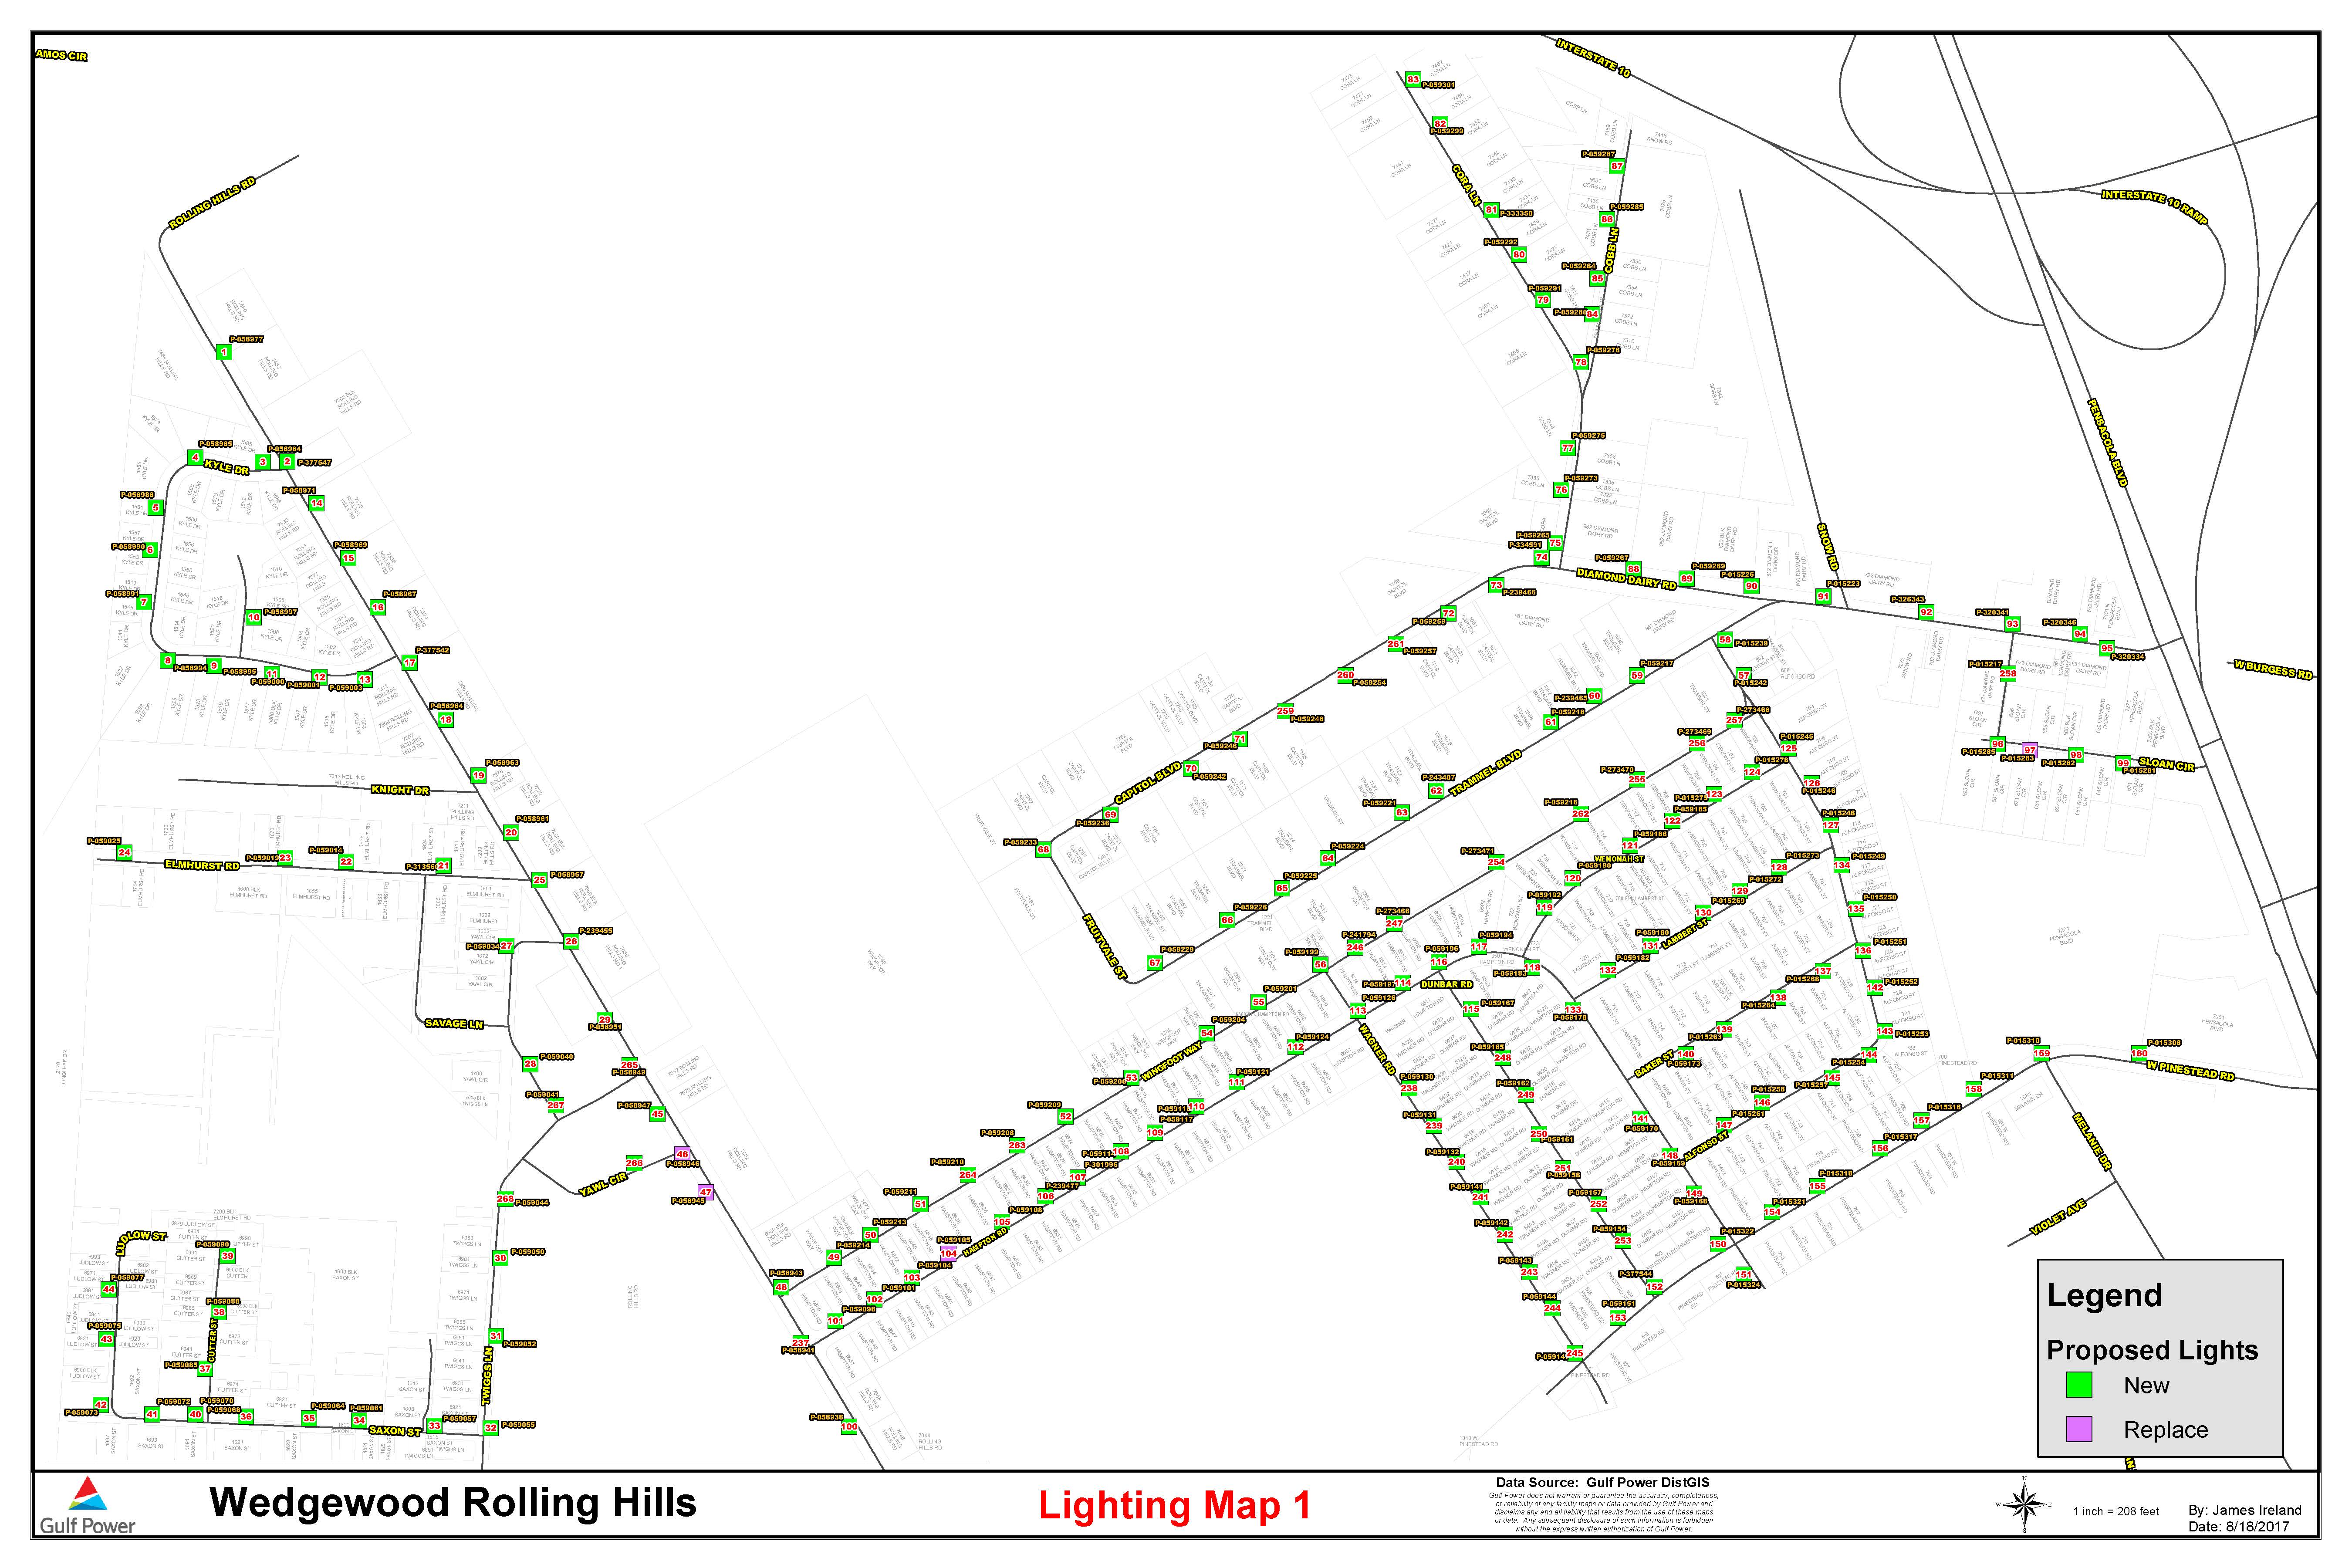 Proposed Wedgewood/Rolling Hills Street Light Map 1